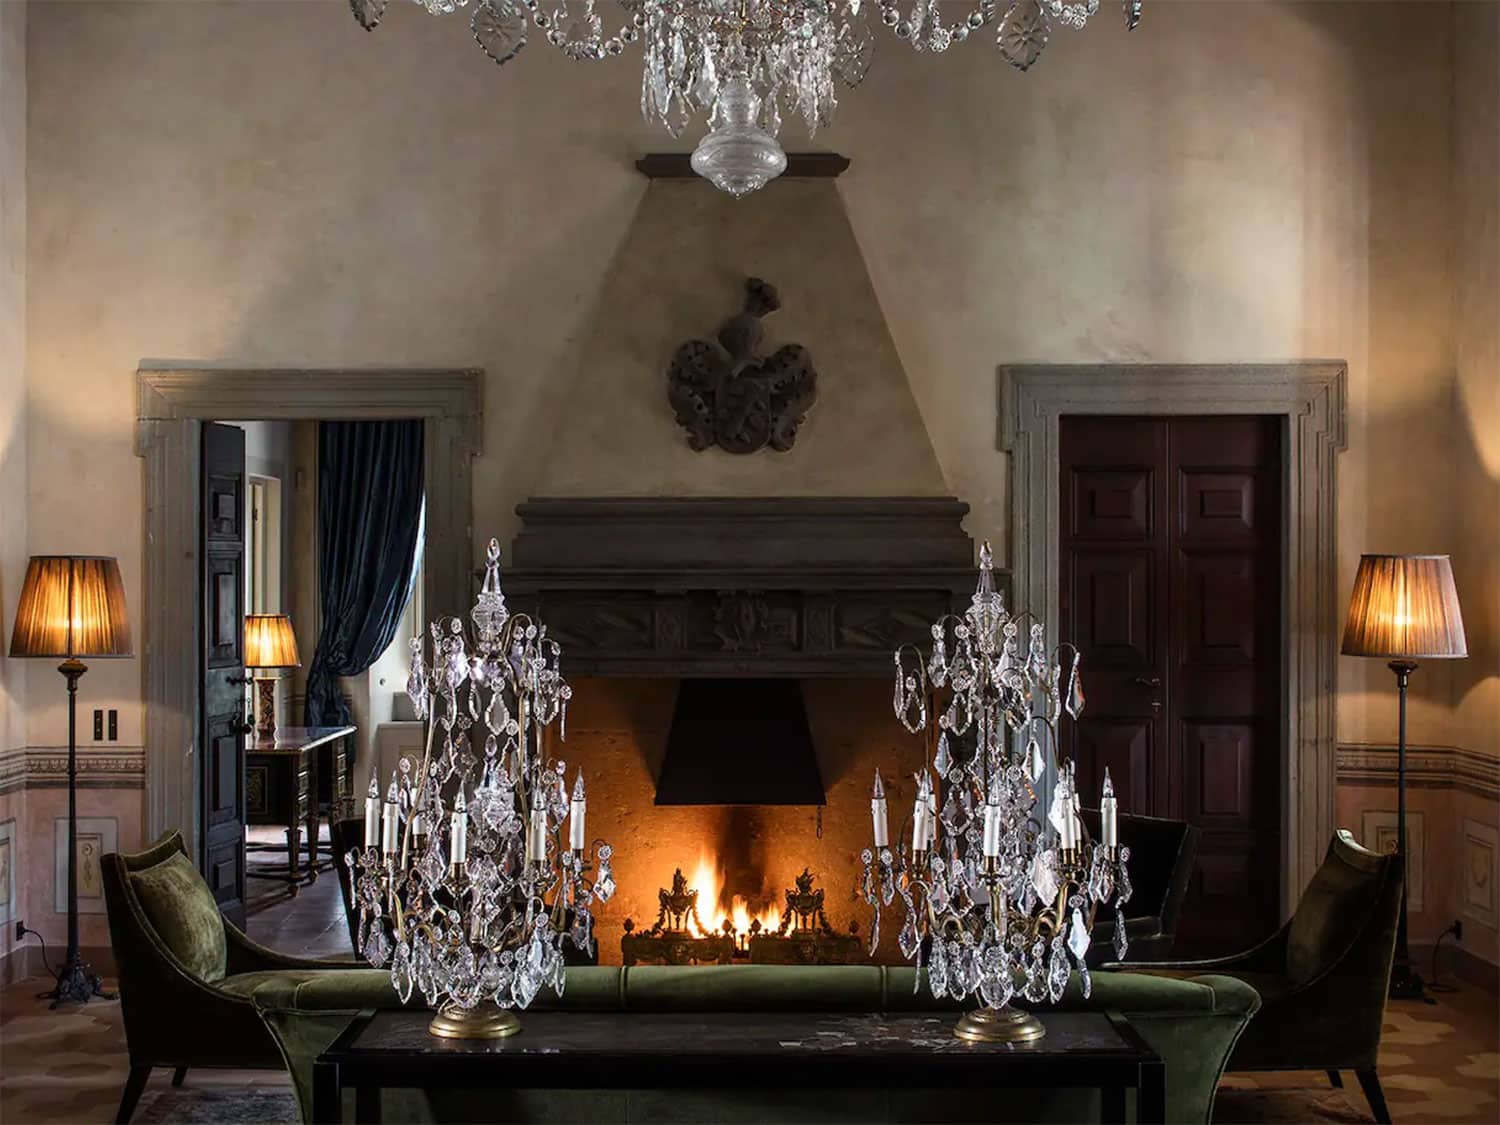 Interior chandelier and furniture of Villa Balbiano, the House of Gucci